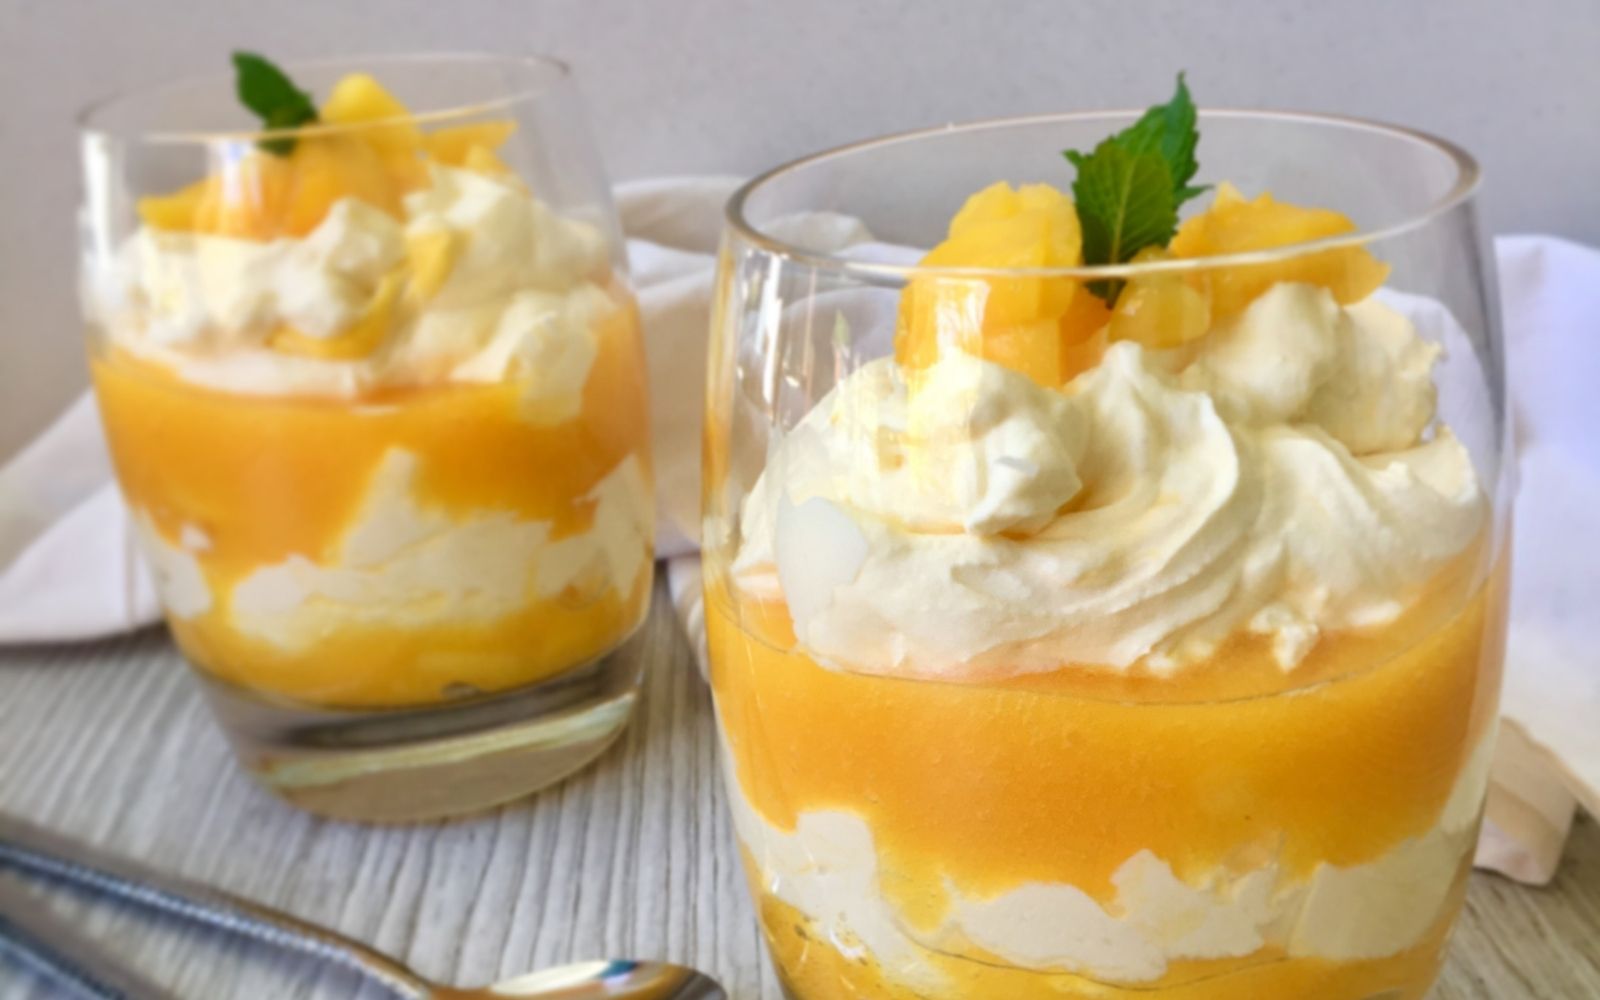 Peach and mango mousse stack